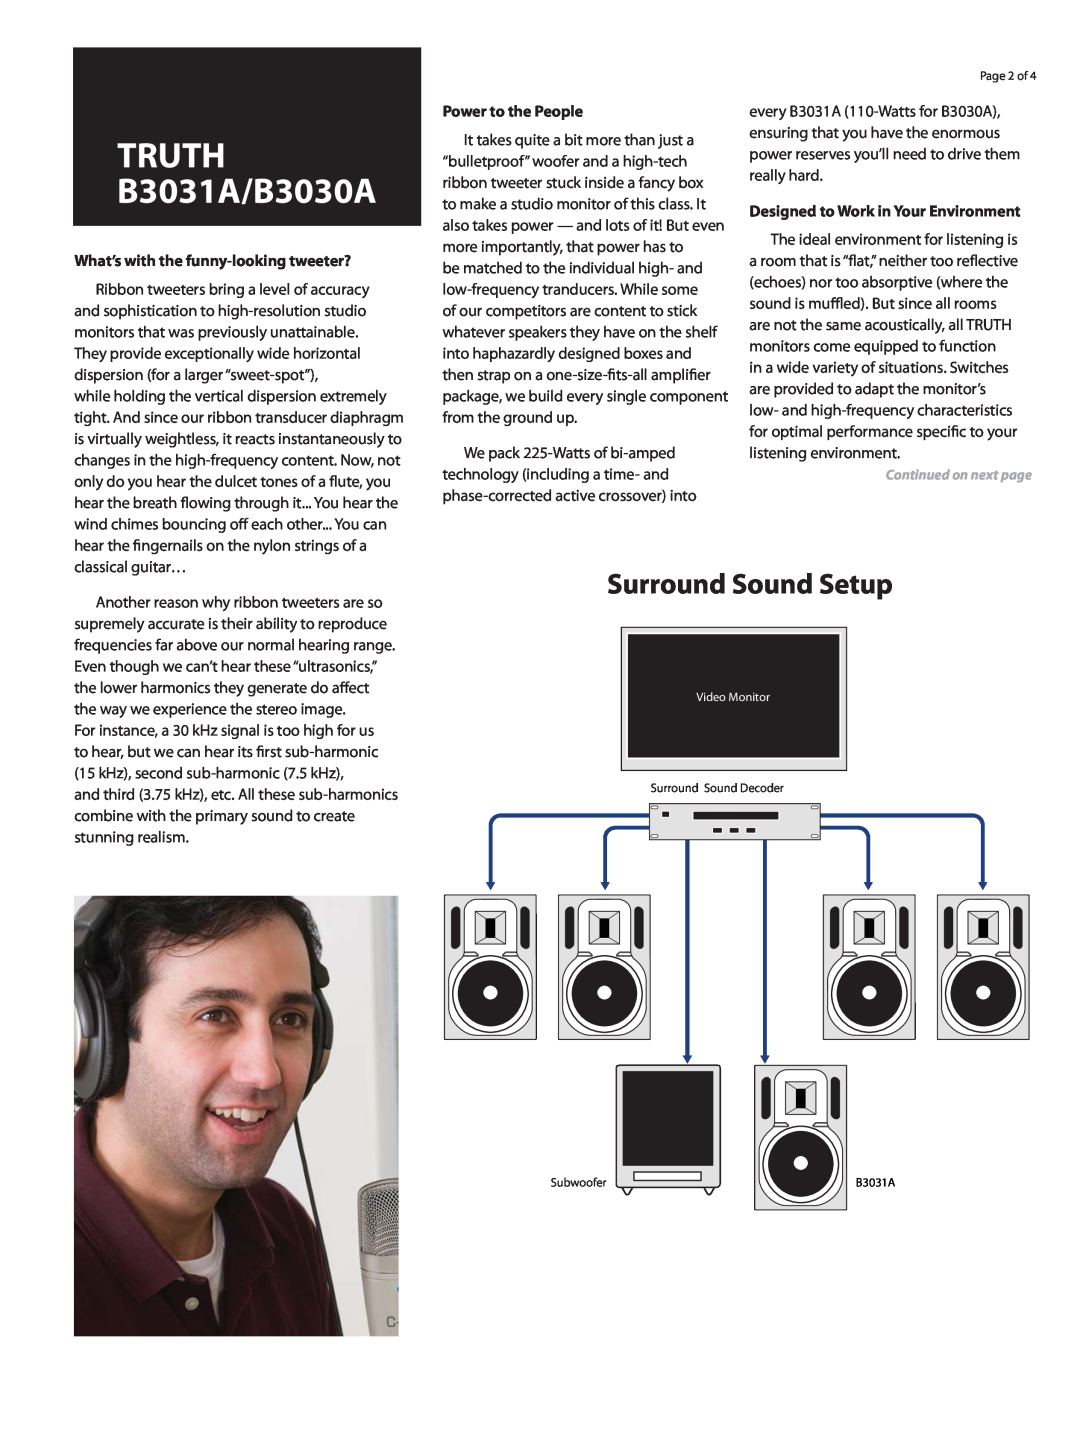 Behringer truth B3031A manual Surround Sound Setup, TRUTH B3031A/B3030A, What’s with the funny-looking tweeter? 